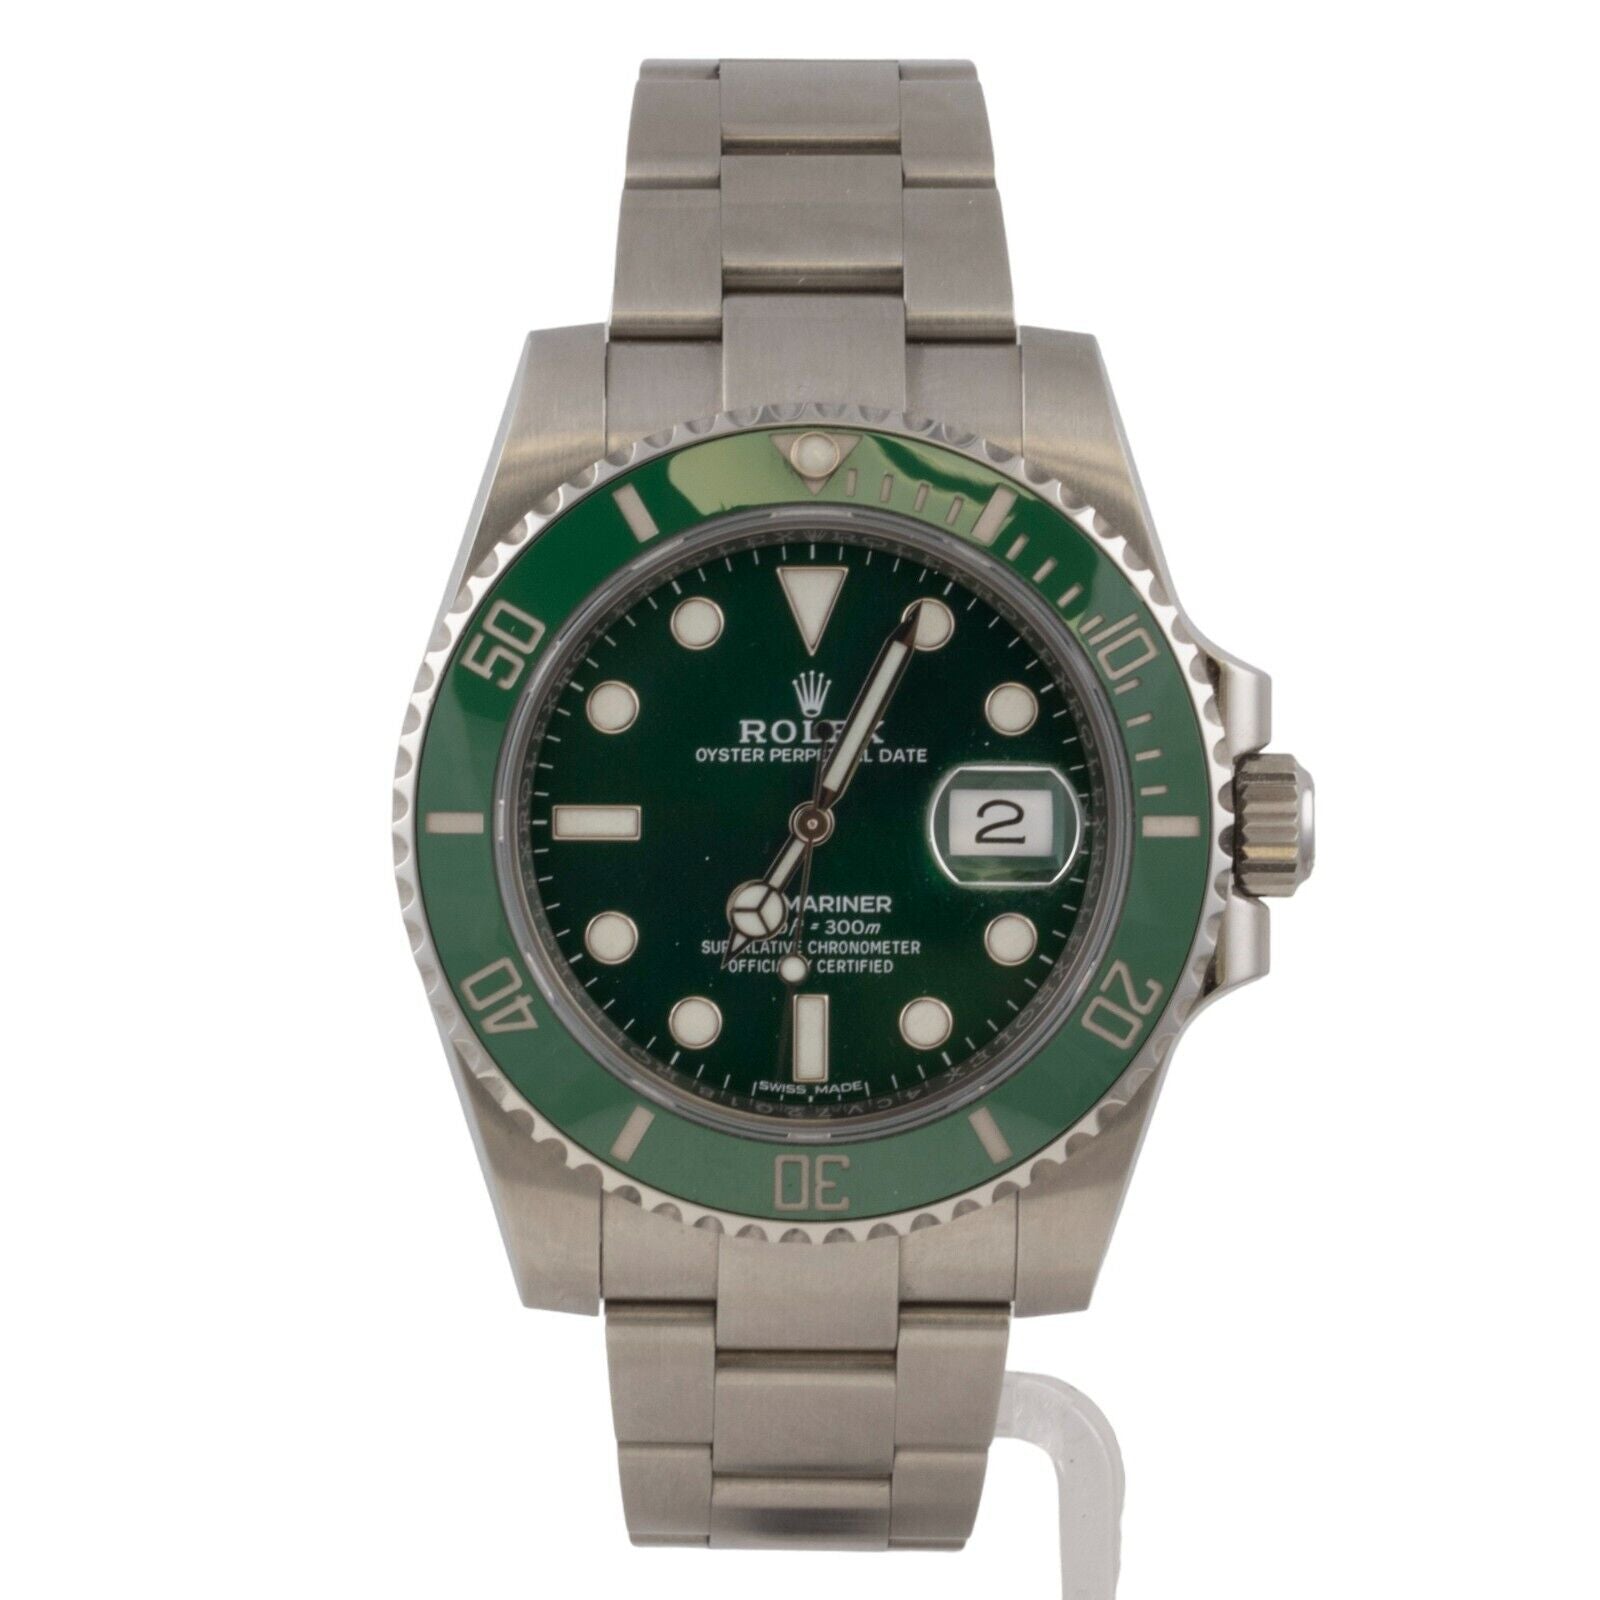 2018 Rolex Submariner HULK Green Stainless Steel 40mm Watch 116610LV BOX PAPERS